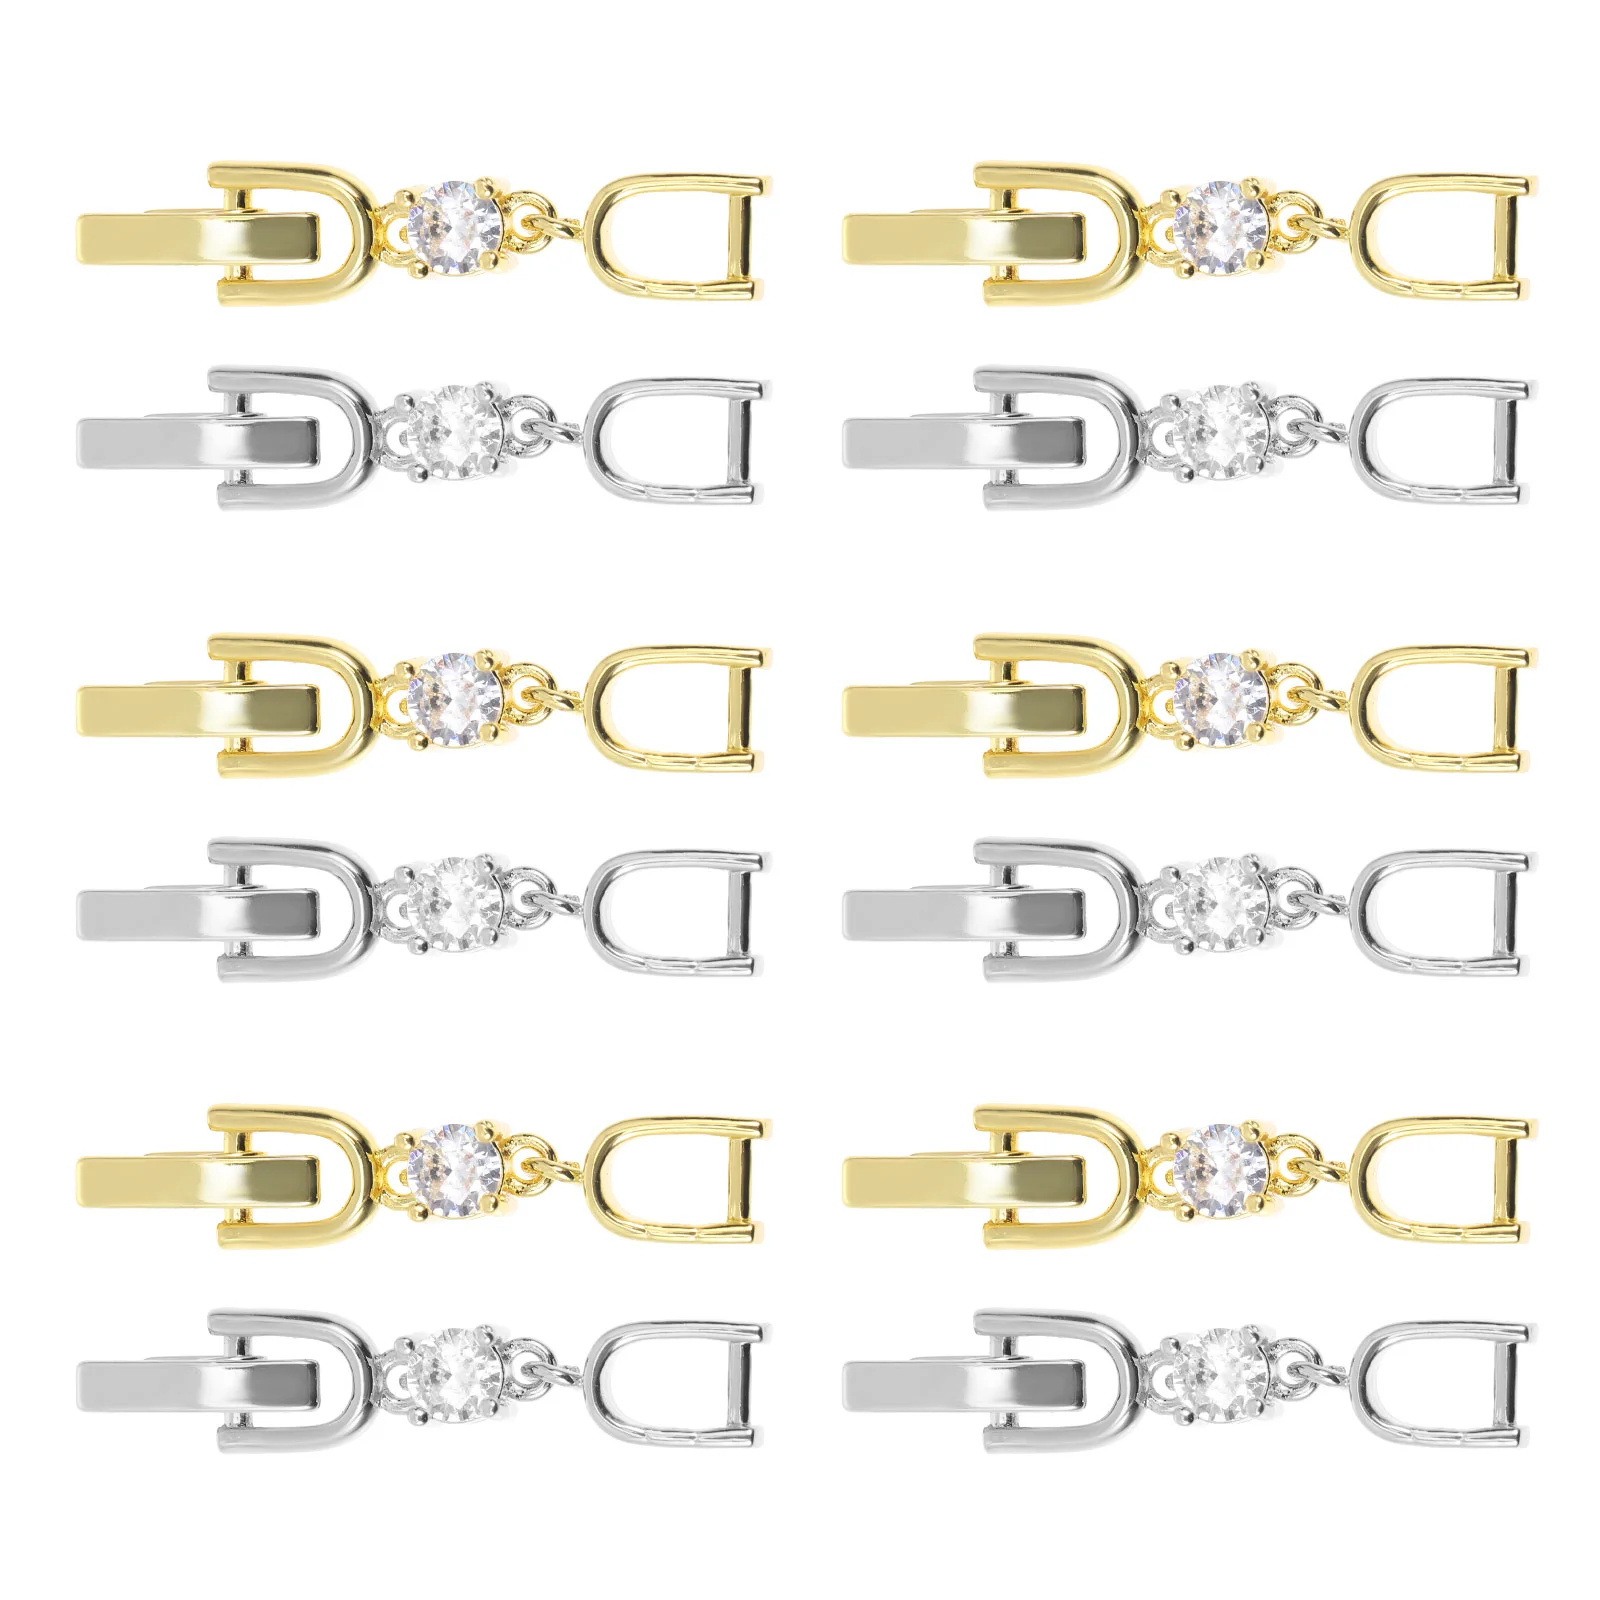 

12 Pcs Accessories Necklace Extender Jewlery Locking Clasp Rhinestone Necklaces Buckles